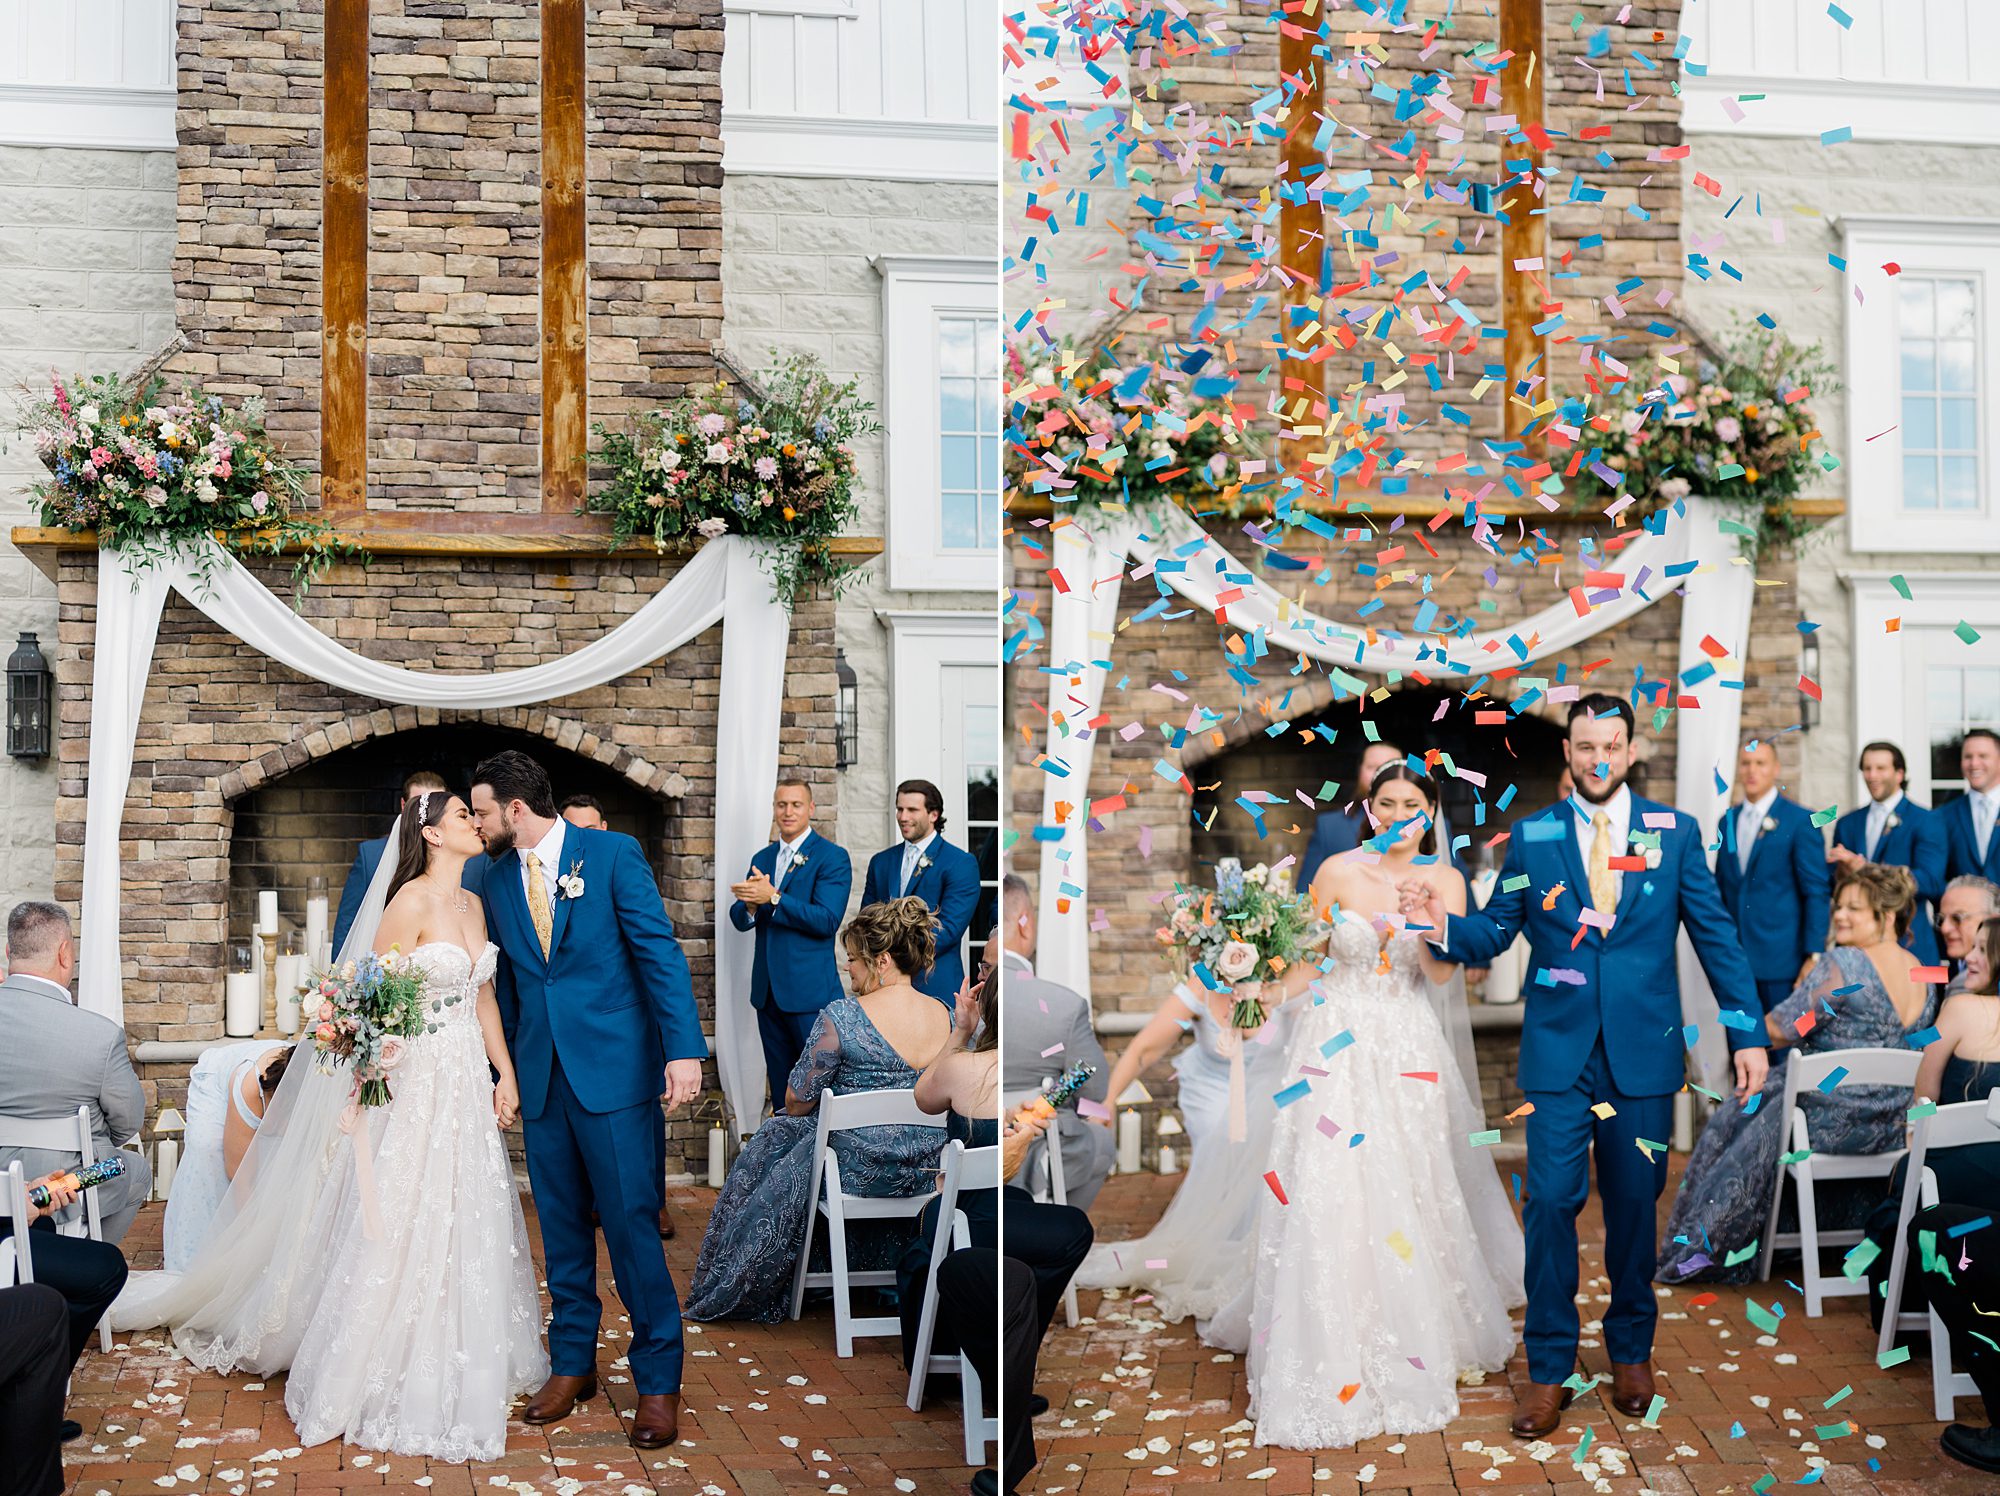 wedding guests throw confetti to celebrate marriage of couple